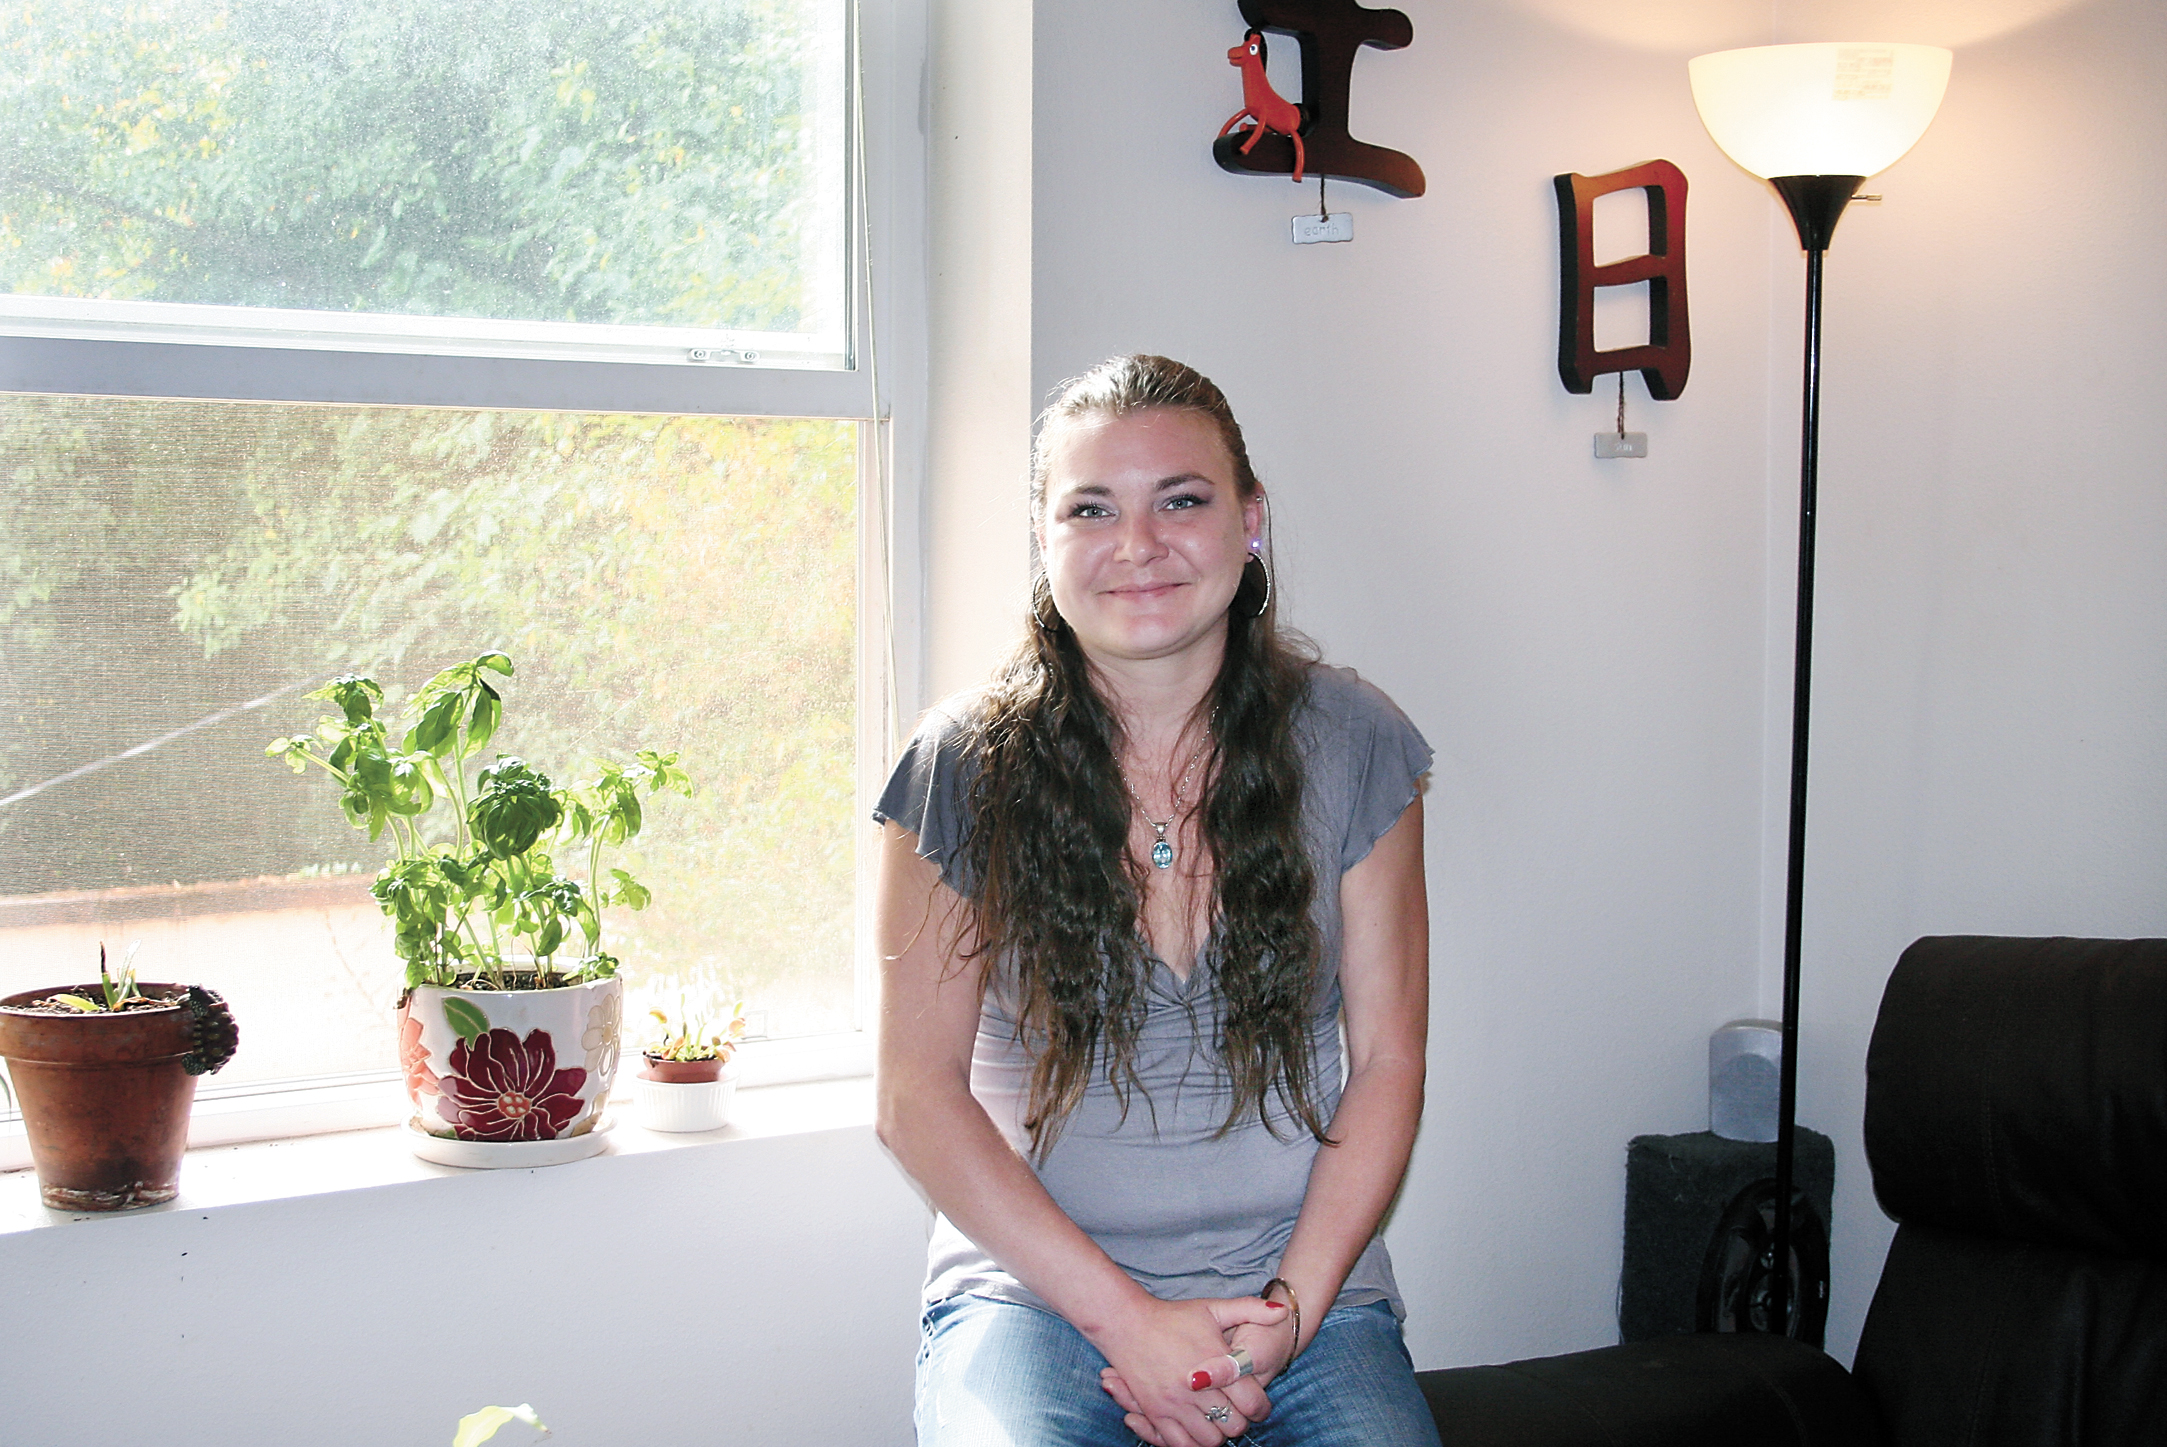 The Peninsula Home Fund was able to help Taren Christenson avoid eviction after an injury prevented her from working